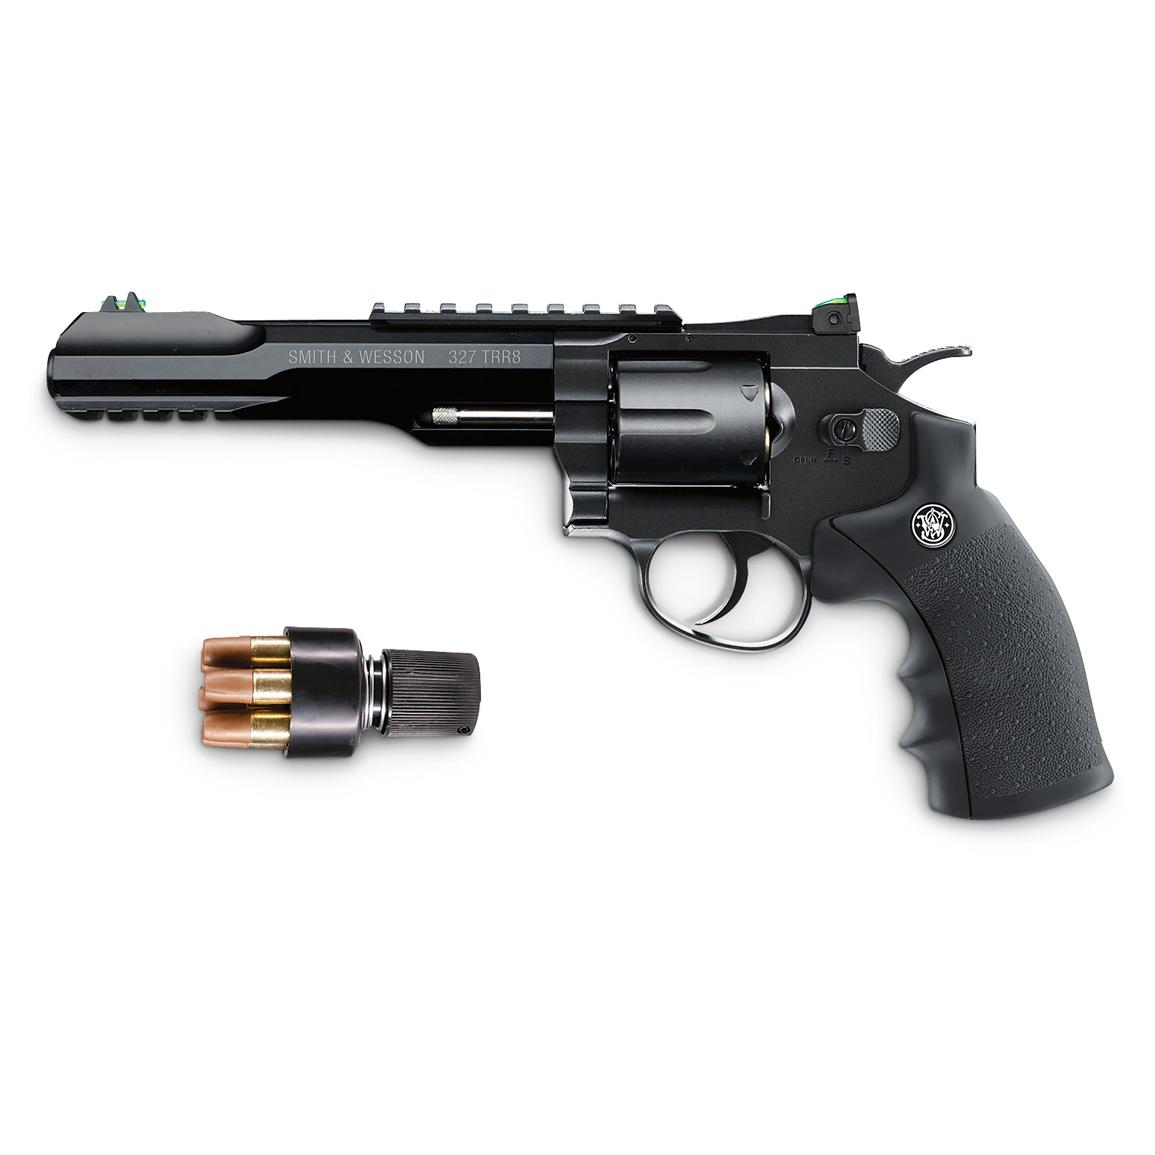 Smith & Wesson Pistol #30